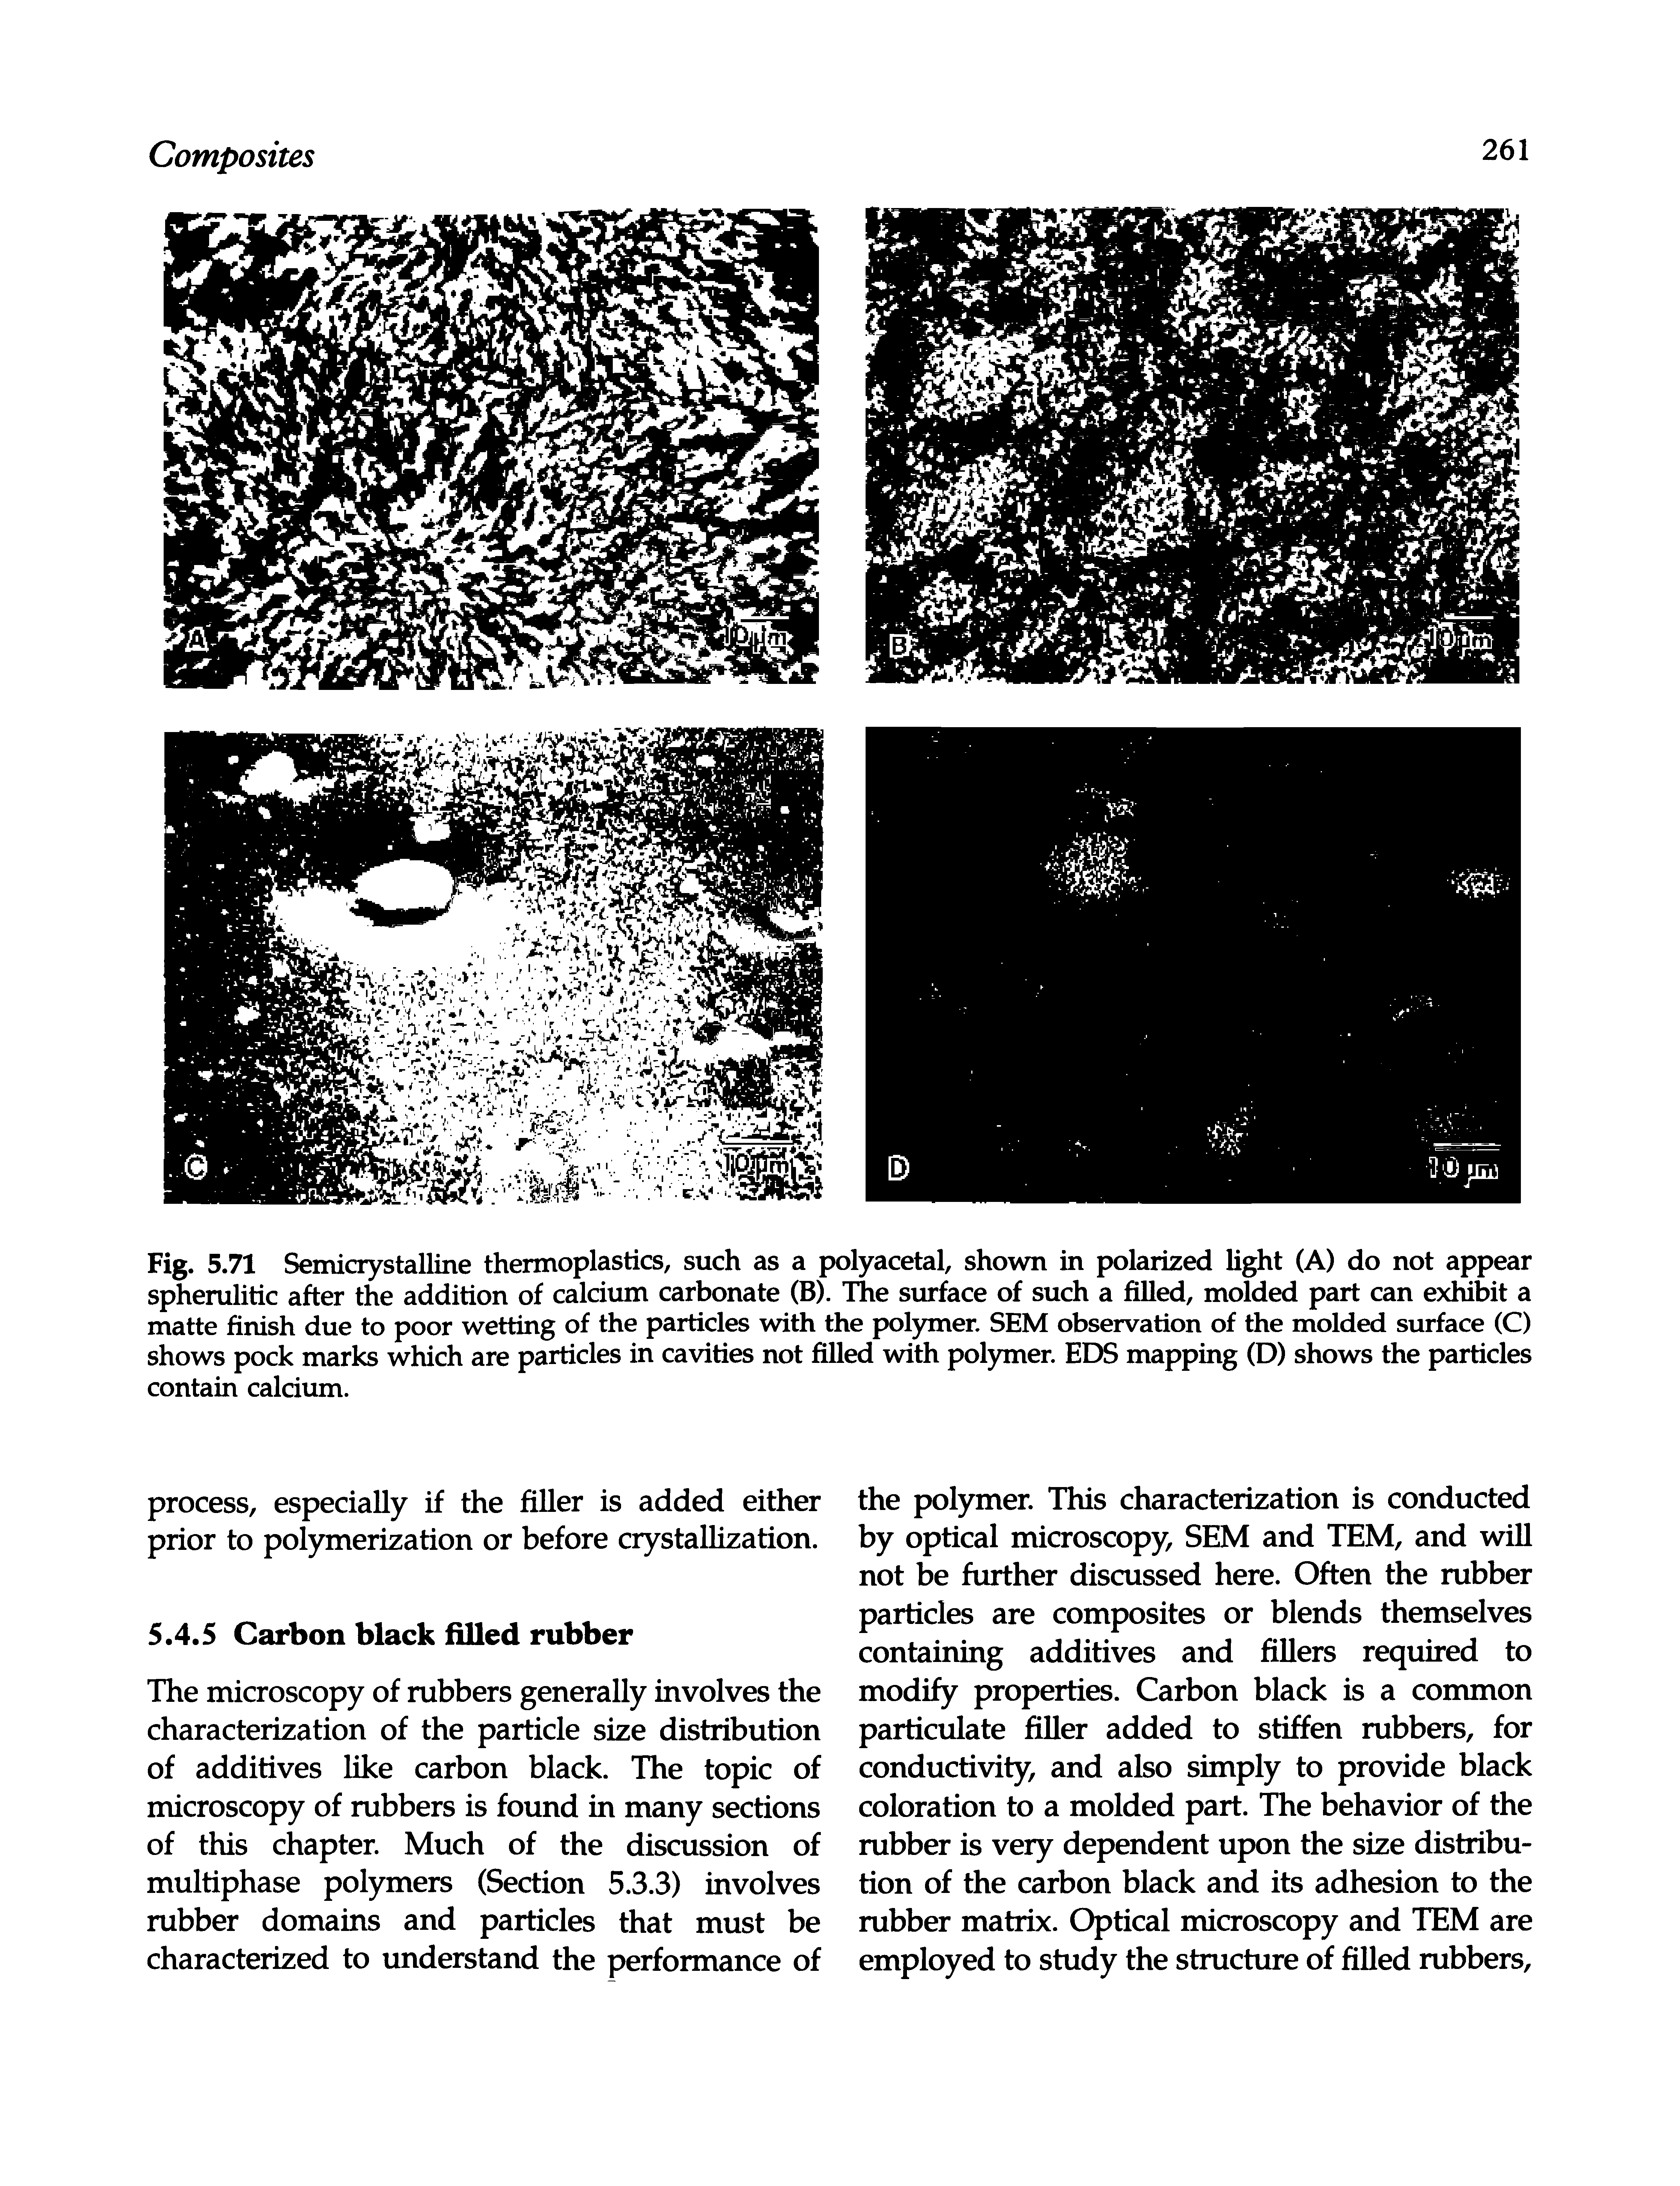 Fig. 5.71 Semicrystalline thermoplastics, such as a polyacetal, shown in polarized light (A) do not appear spherulitic after the addition of calcium carbonate (B). llie surface of such a filled, molded part can exWbit a matte finish due to poor wetting of the particles with the pol)nner. SEM observation of the molded surface (C) shows pock marks which are particles in cavities not filled with pol)nner. EDS mapping (D) shows the particles contain calcium.